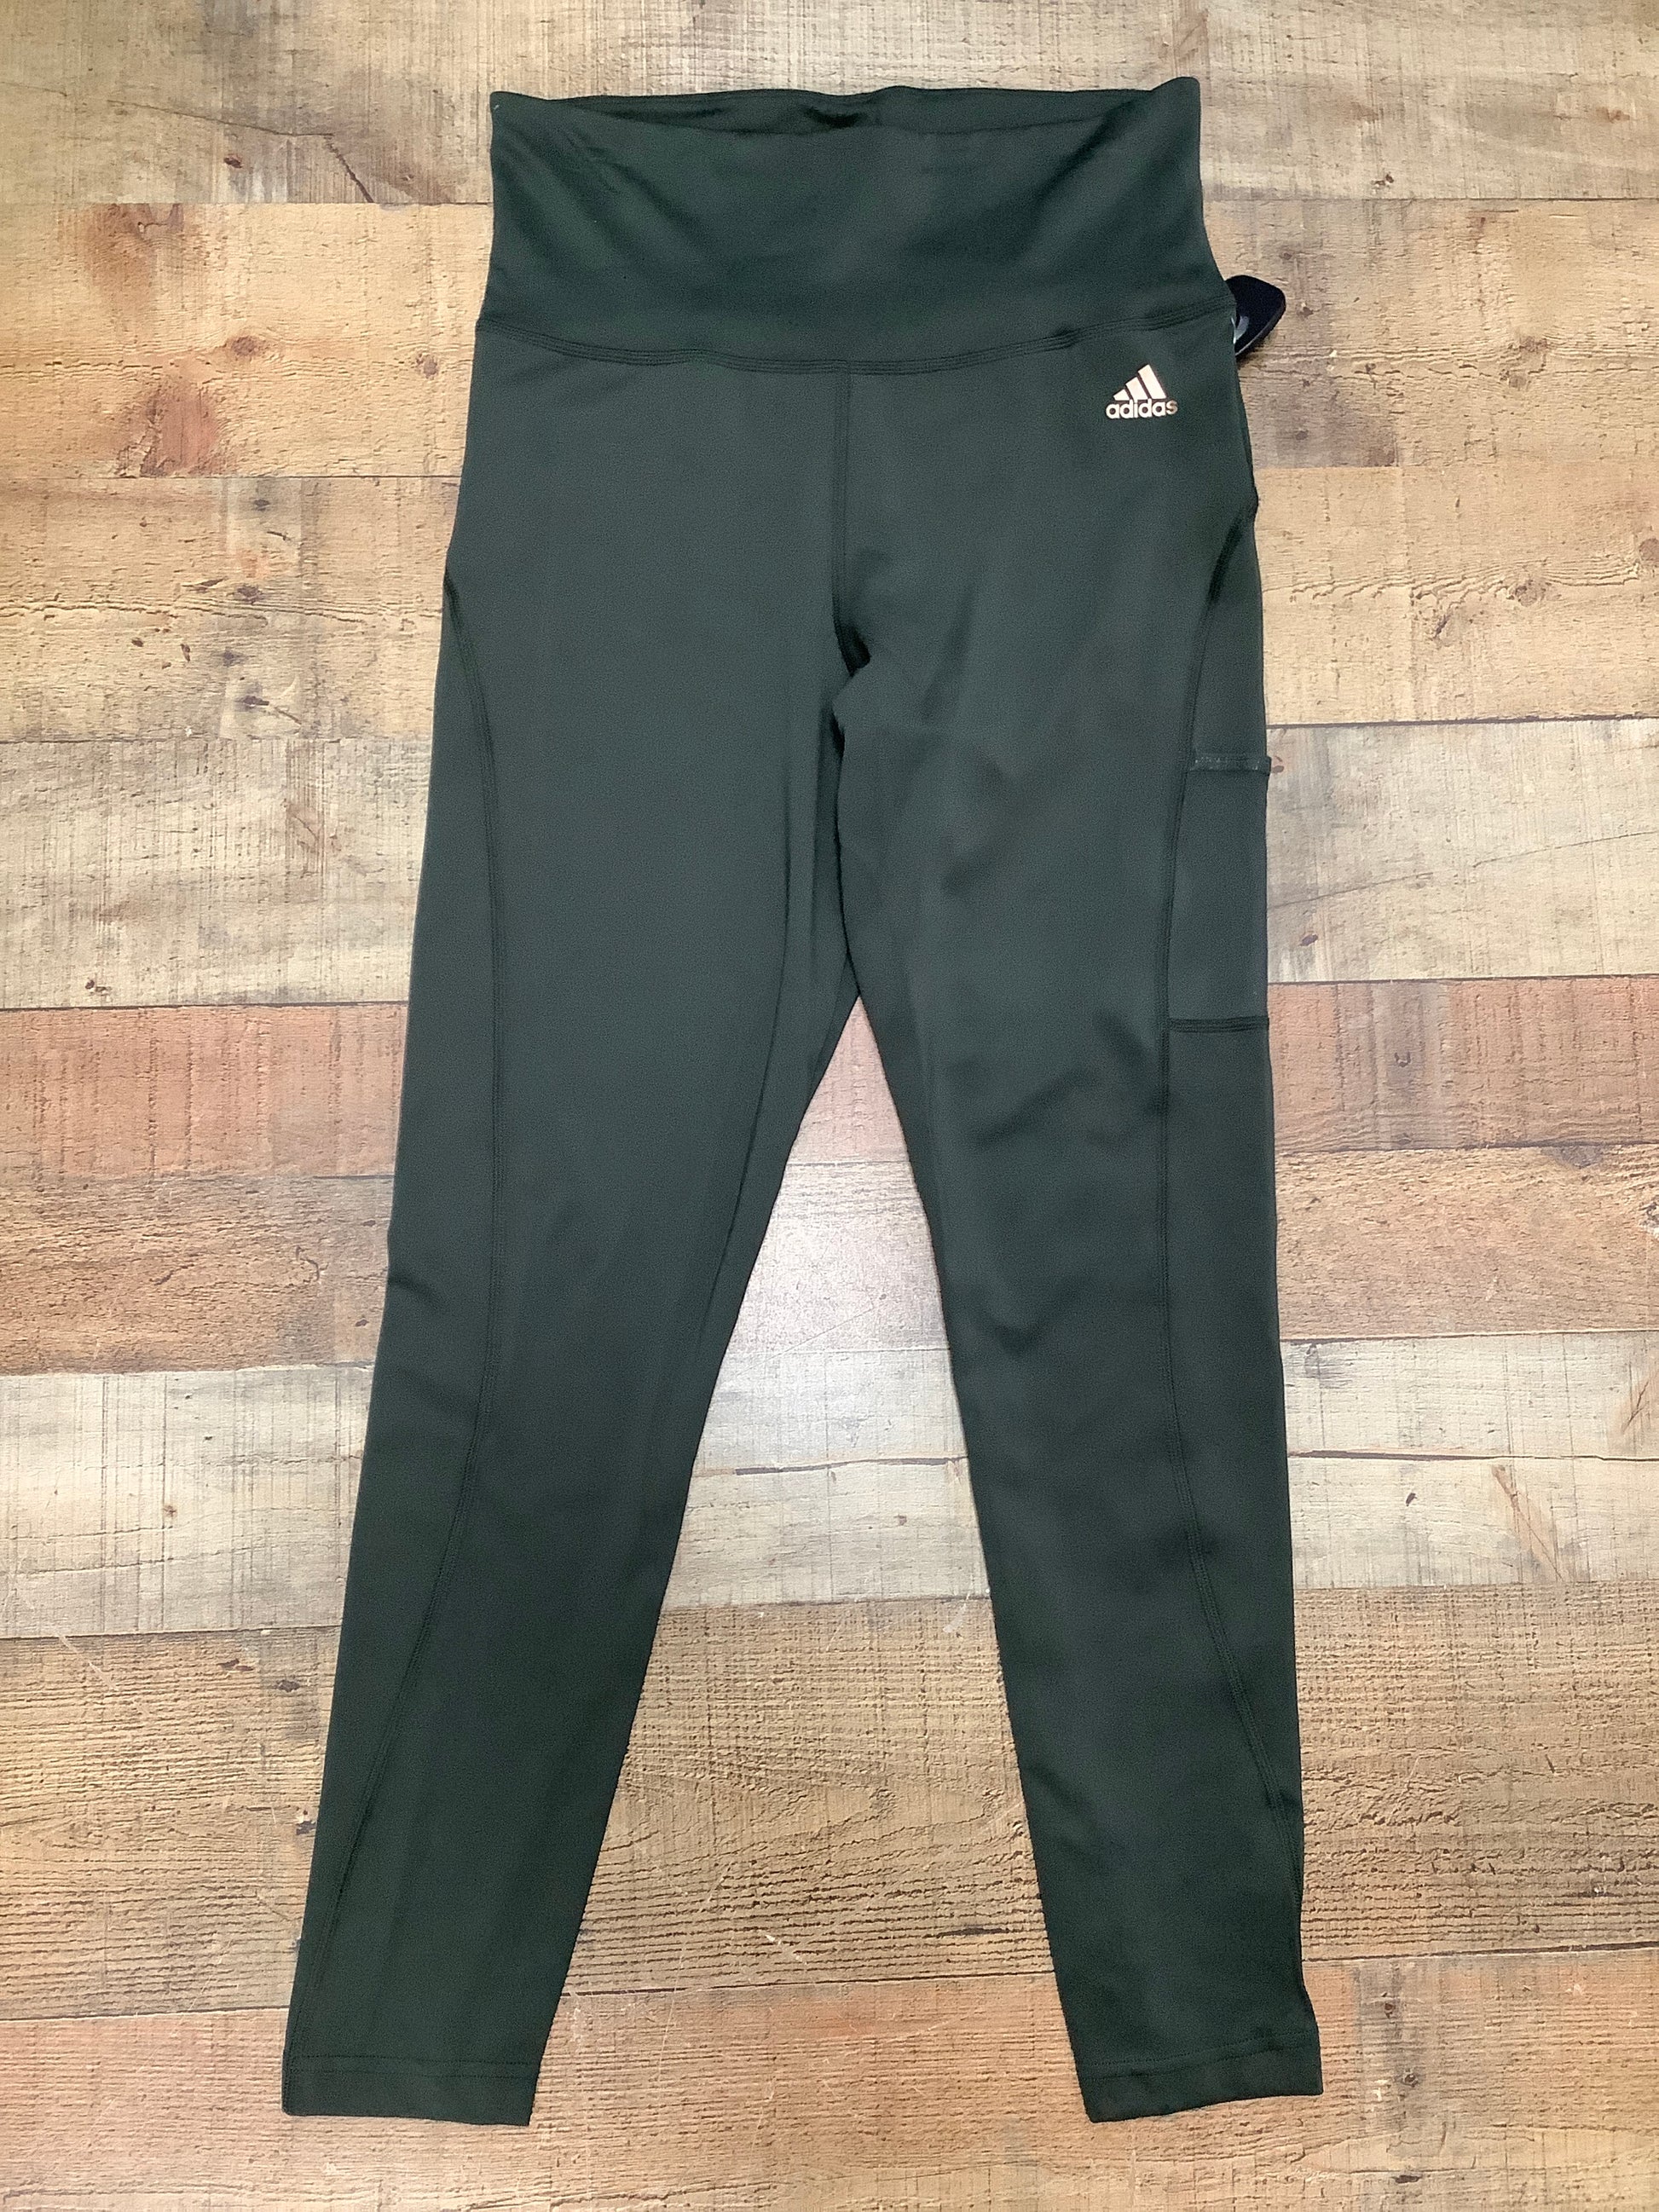 Athletic Leggings By Adidas Size: Xs